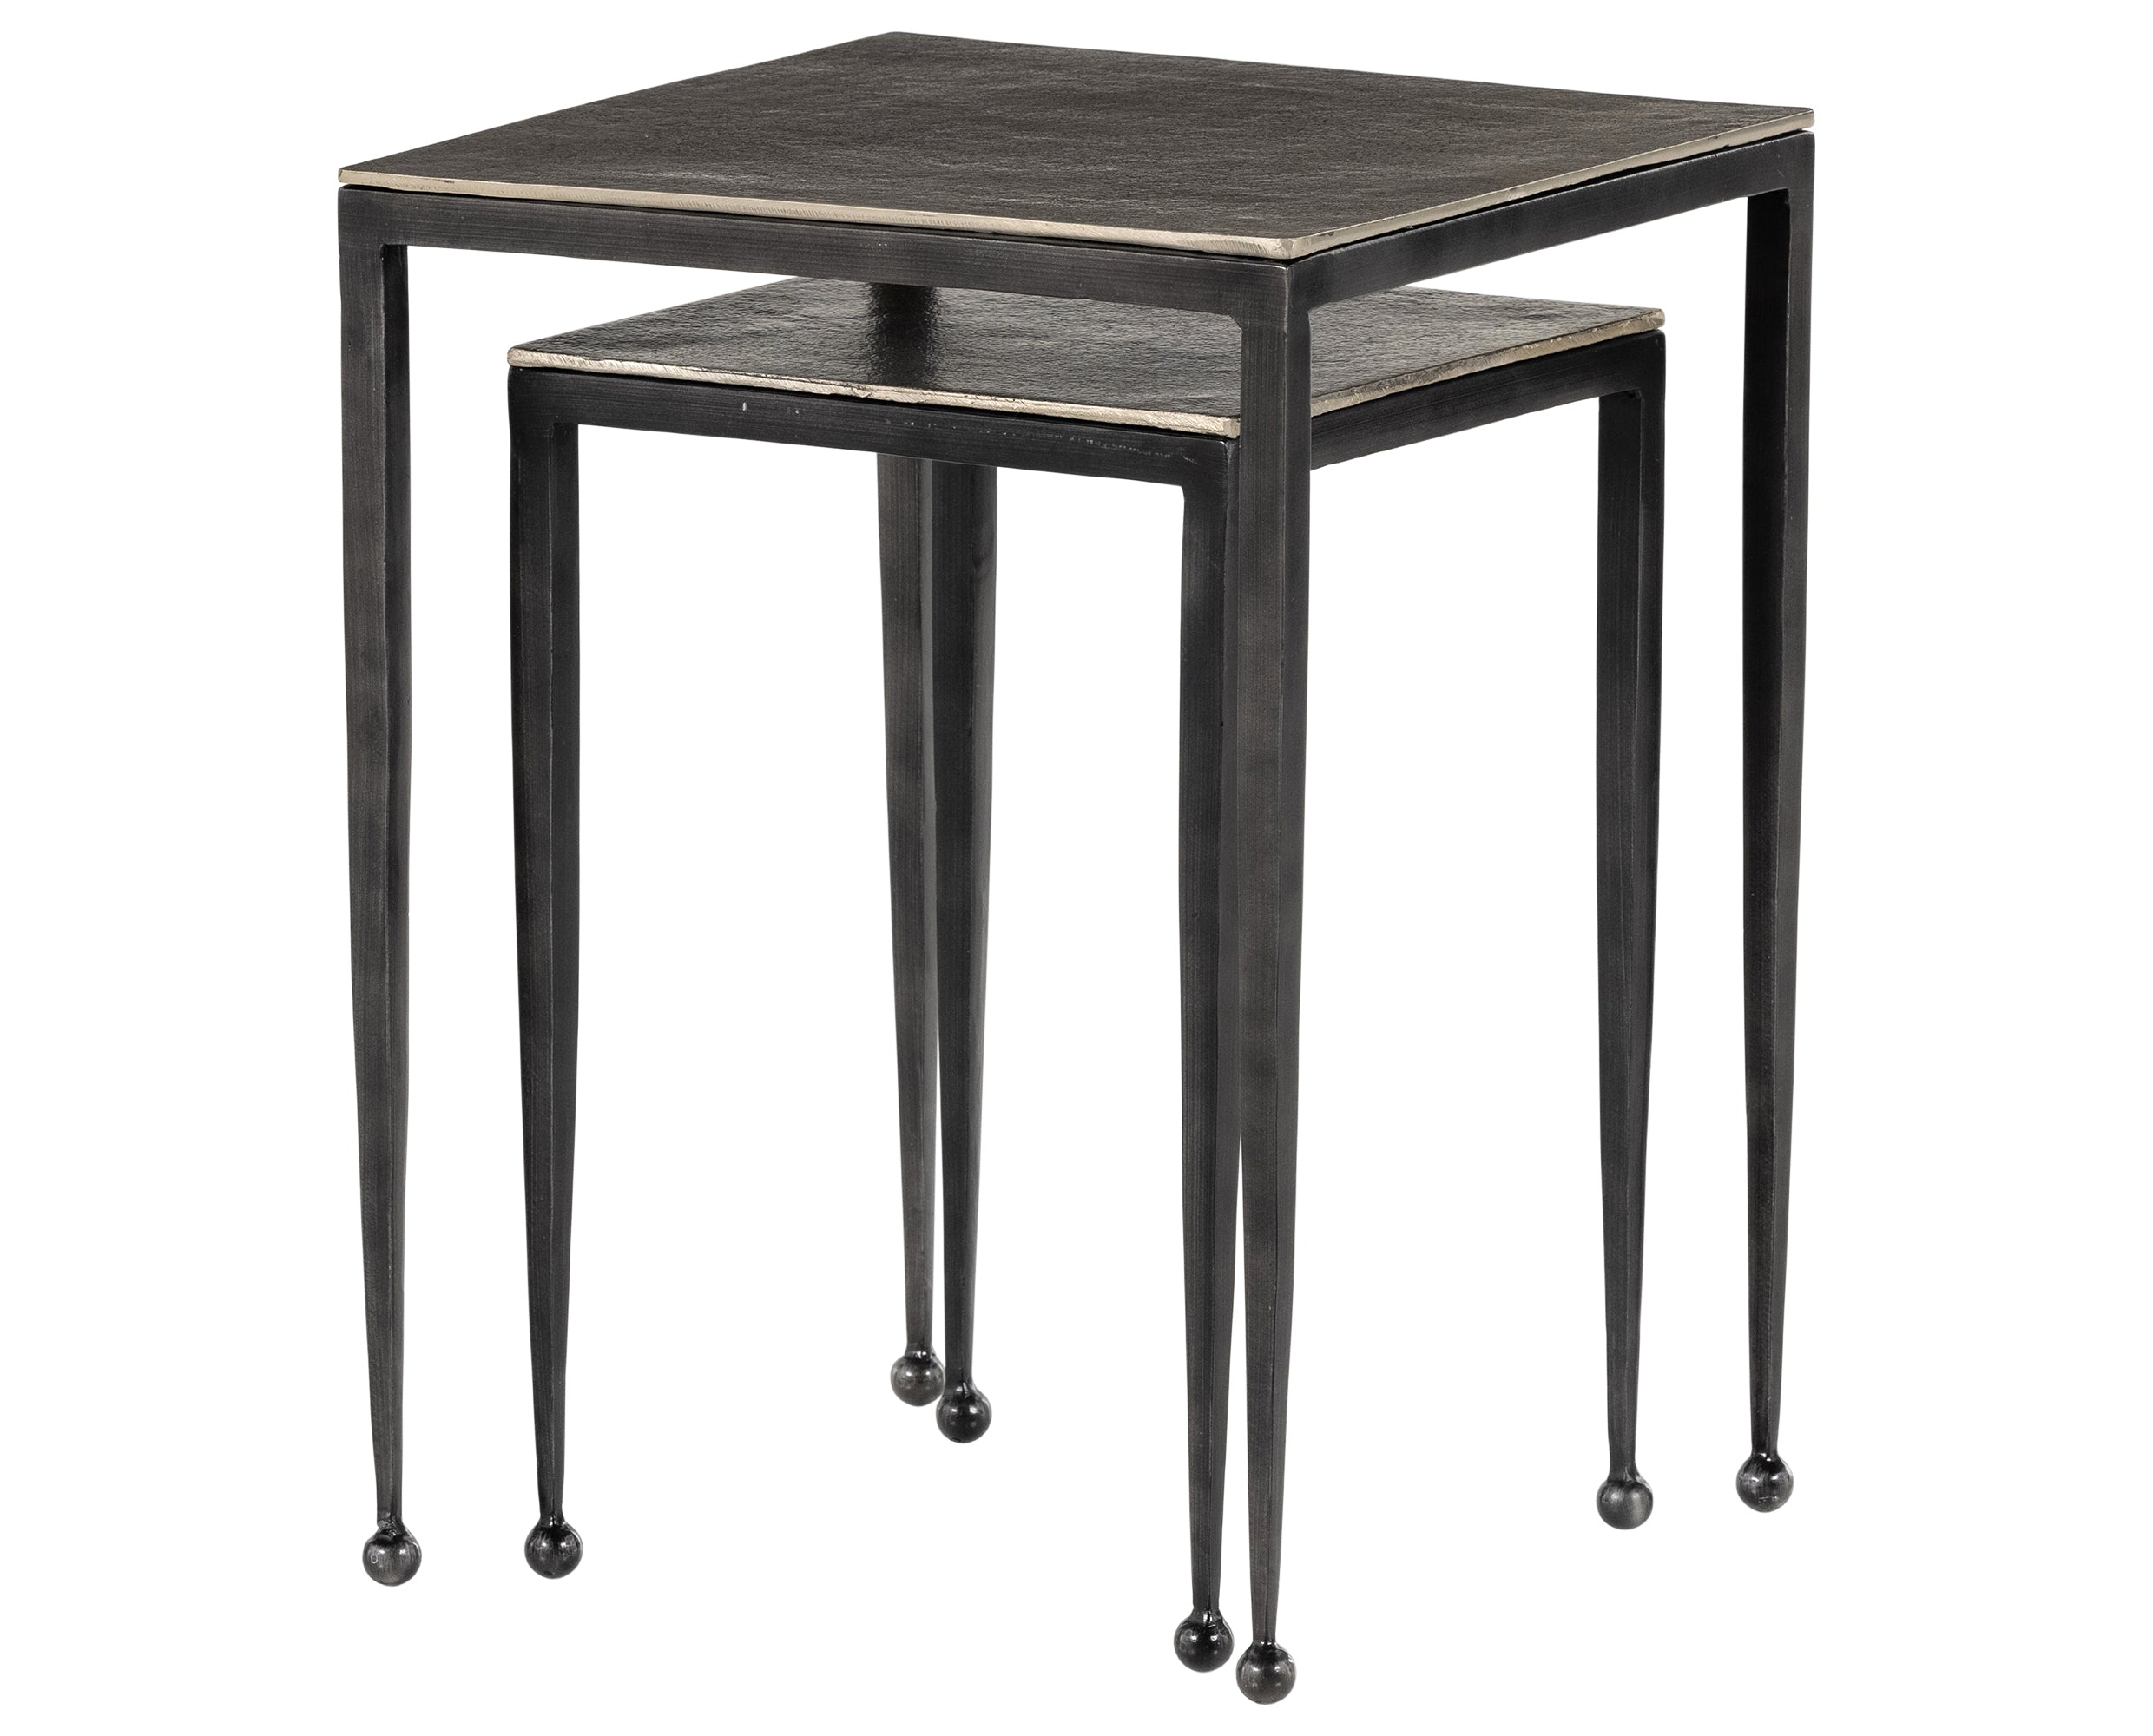 Antique Nickel | Dalston Nesting End Table | Valley Ridge Furniture